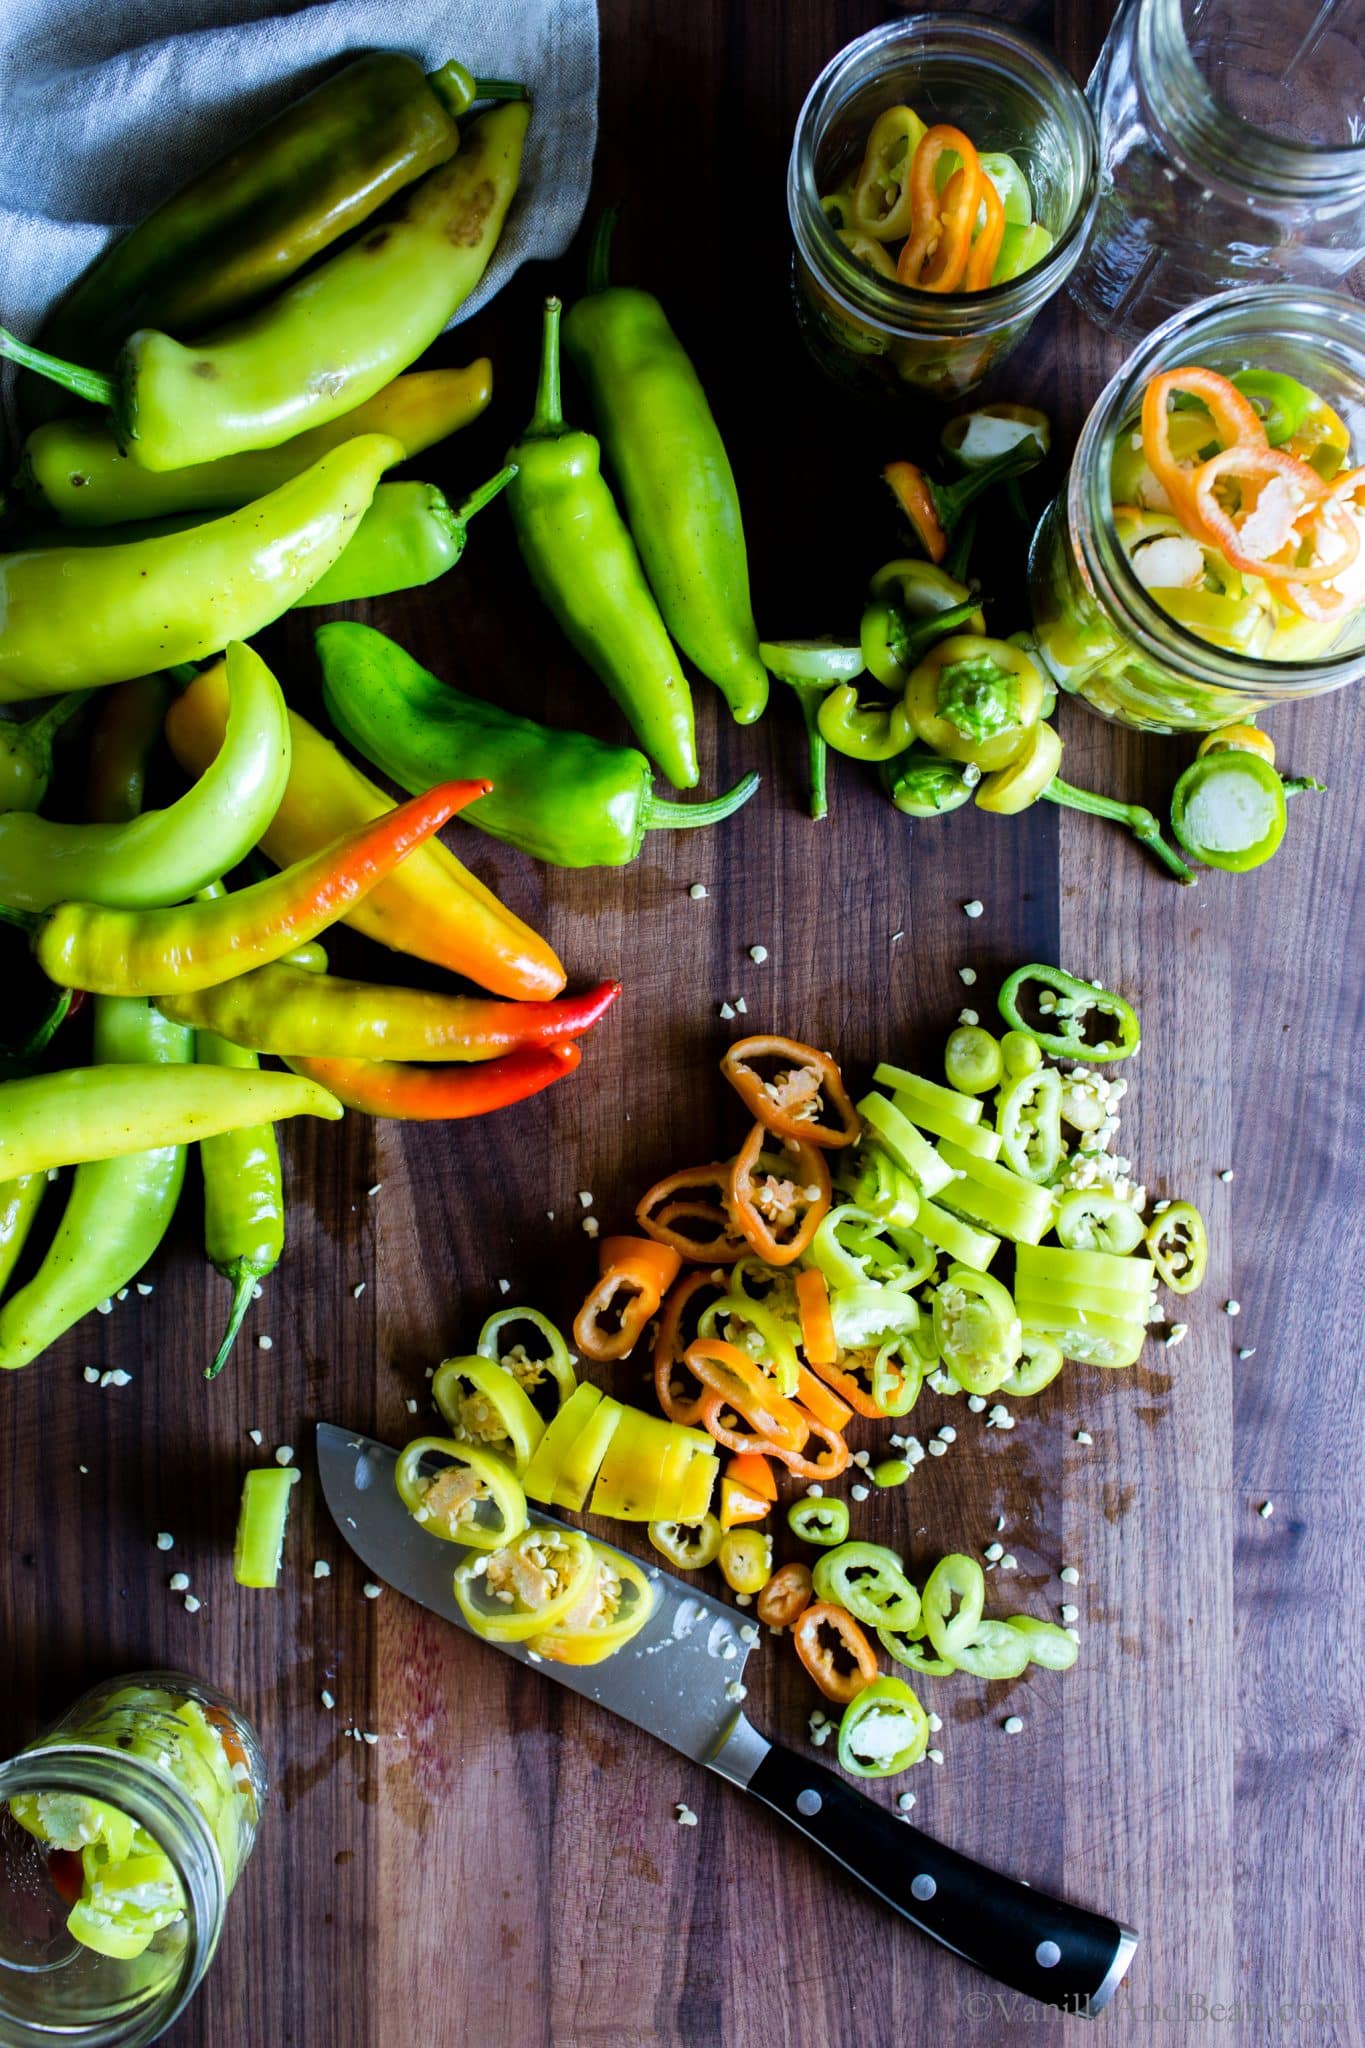 Chopping Hungarian wax peppers and packing pickling jars with the sliced peppers. . 